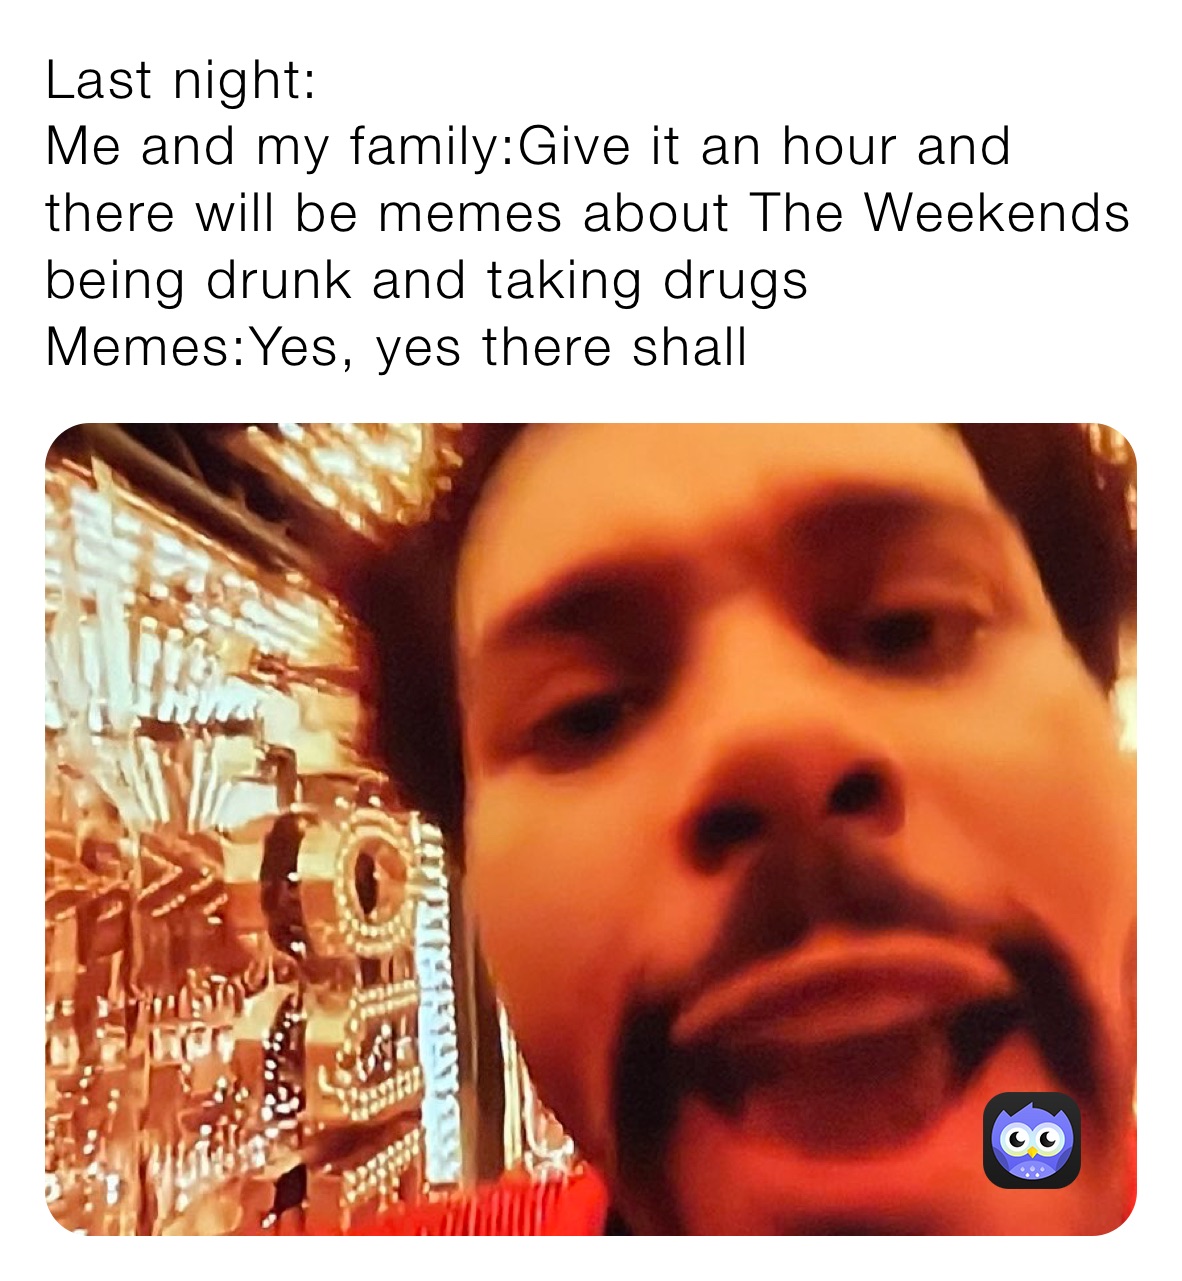 Last night:
Me and my family:Give it an hour and there will be memes about The Weekends being drunk and taking drugs
Memes:Yes, yes there shall